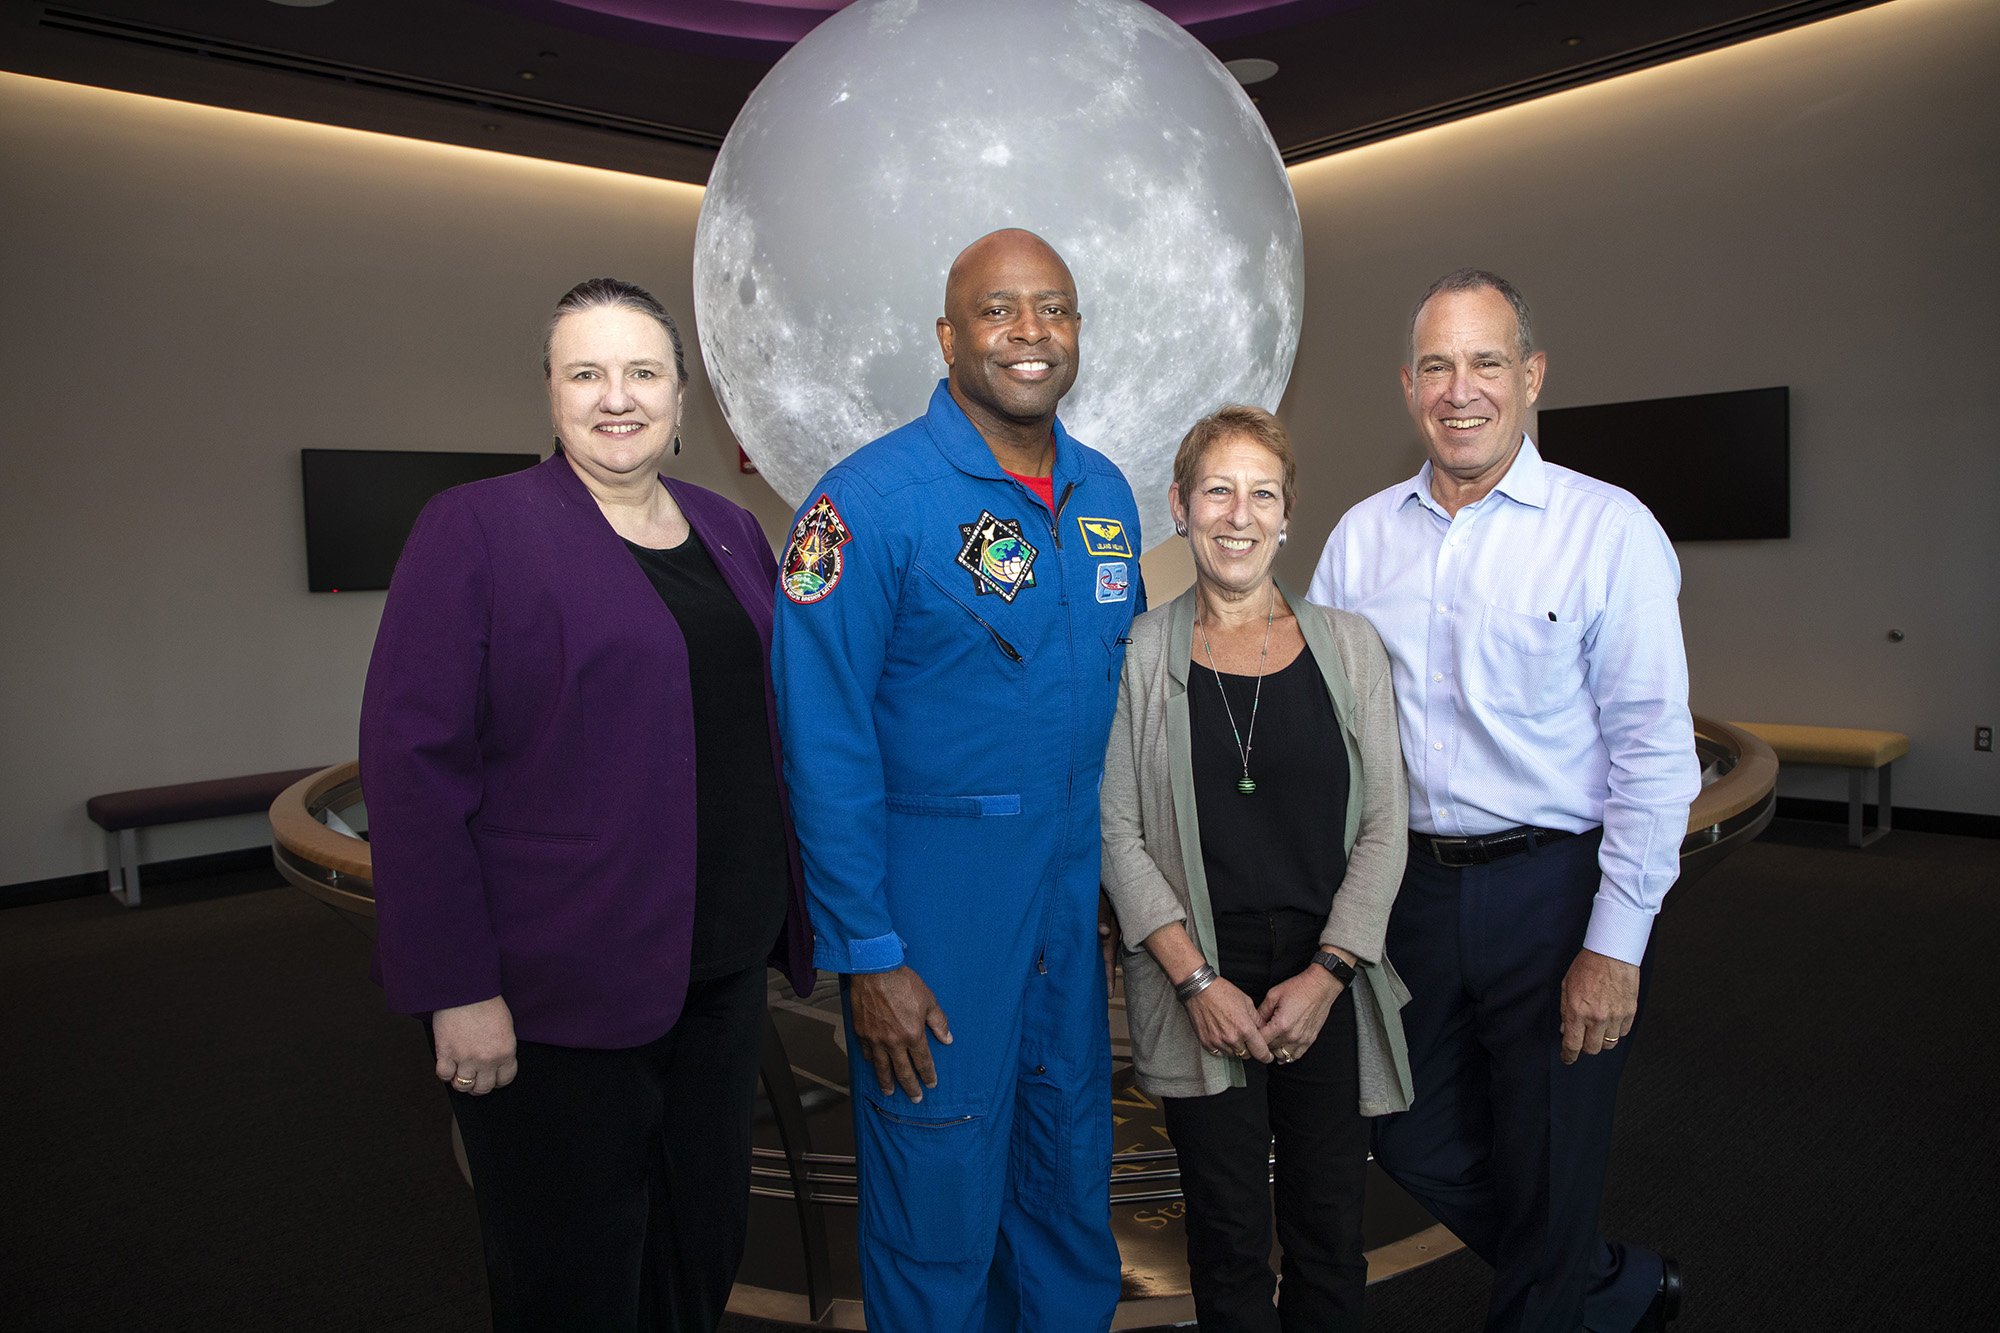 CNSE Dean Michele J. Grimm, Former NASA Astronaut Leland Melvin, Caryn Bunshaft '82, and Albert Bunshaft '80 have their photo taken in the Sphere Room at UAlbany's ETEC.